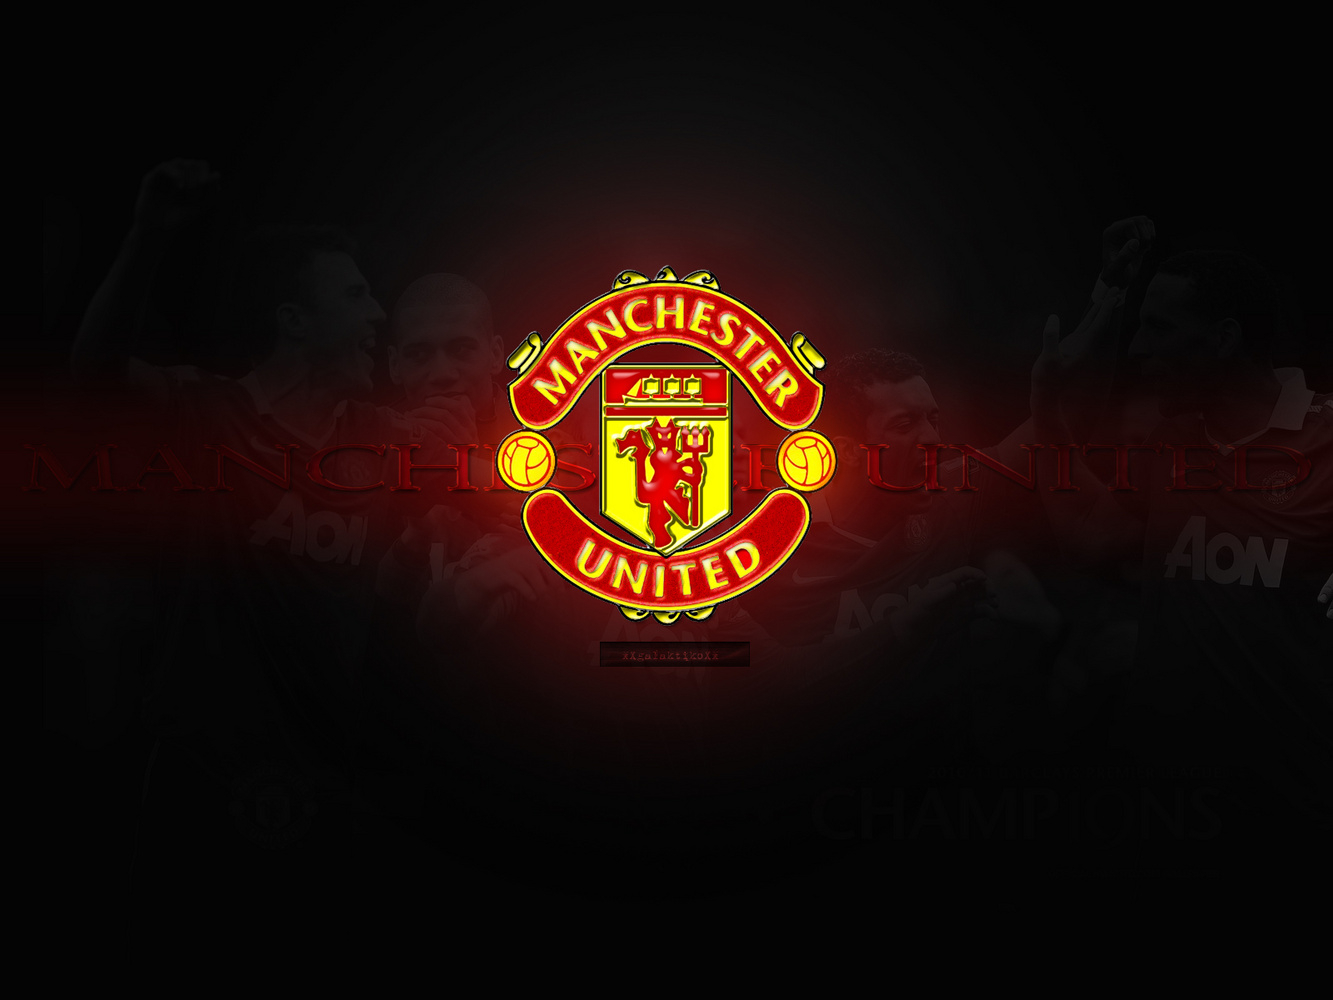 World Sports Hd Wallpapers Manchester United Hd Wallpapers 2012